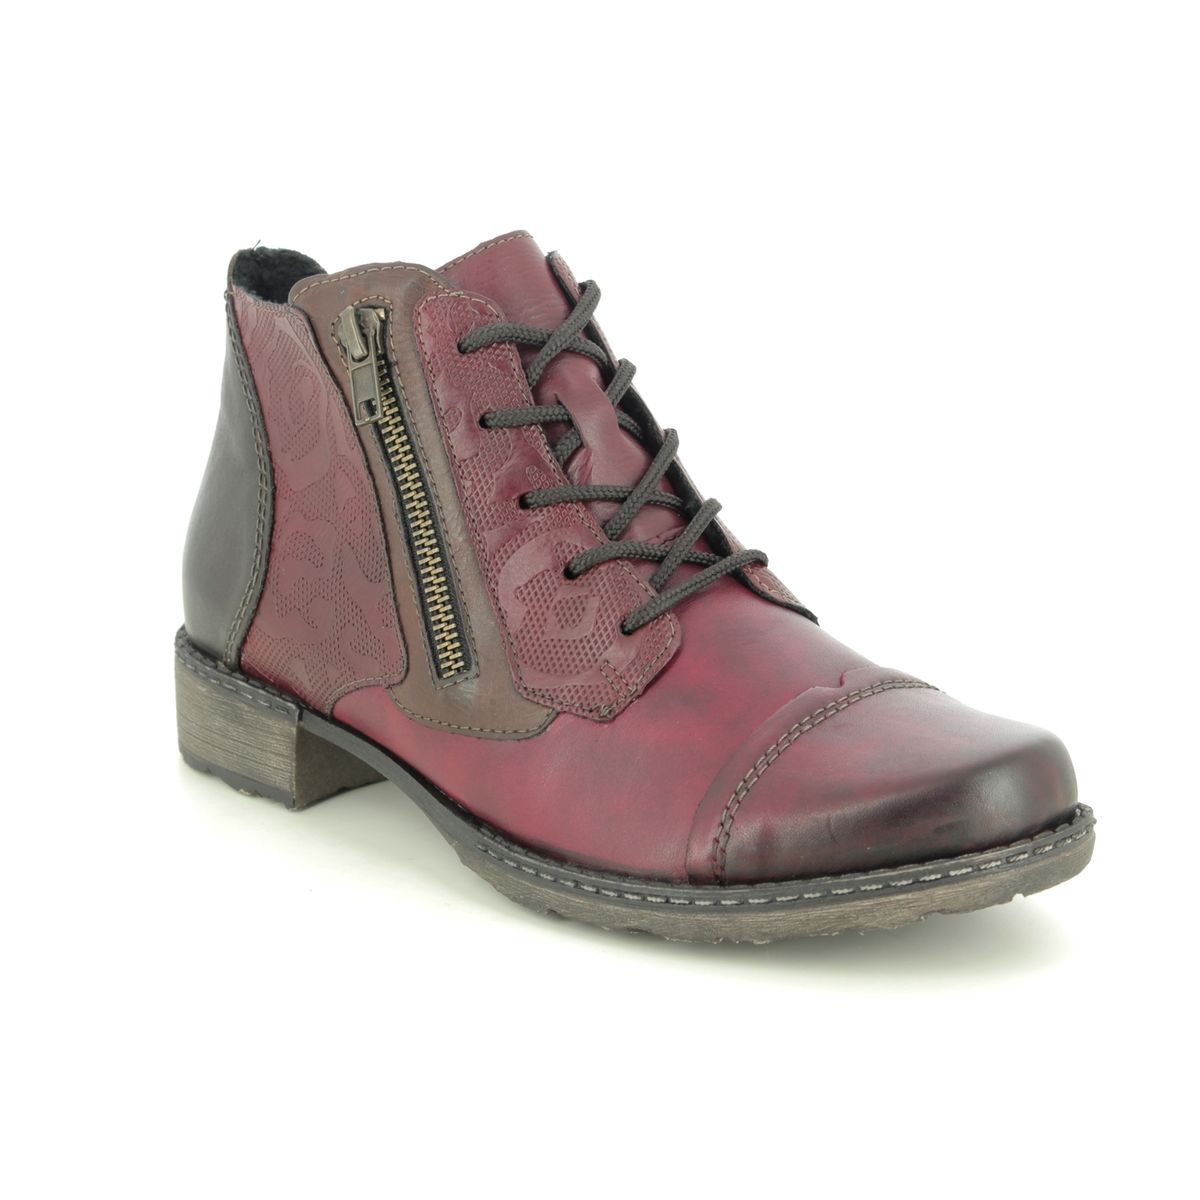 Spytte ud anden Danmark Remonte Peeshel D4378-35 Wine leather Lace Up Boots